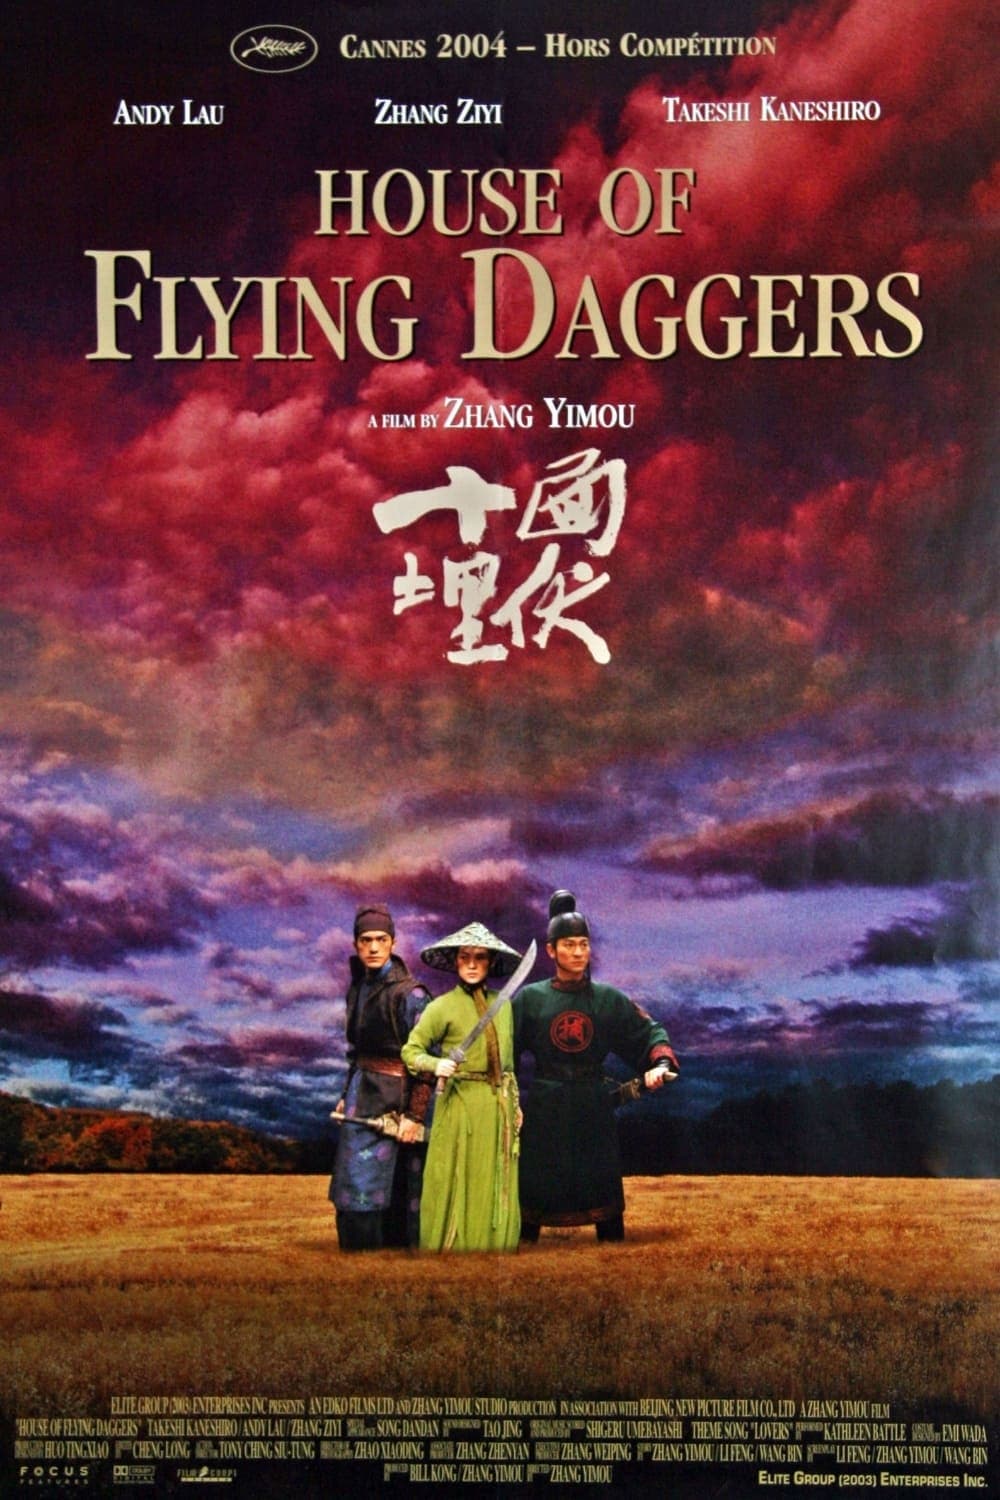 Making of House of Flying Daggers